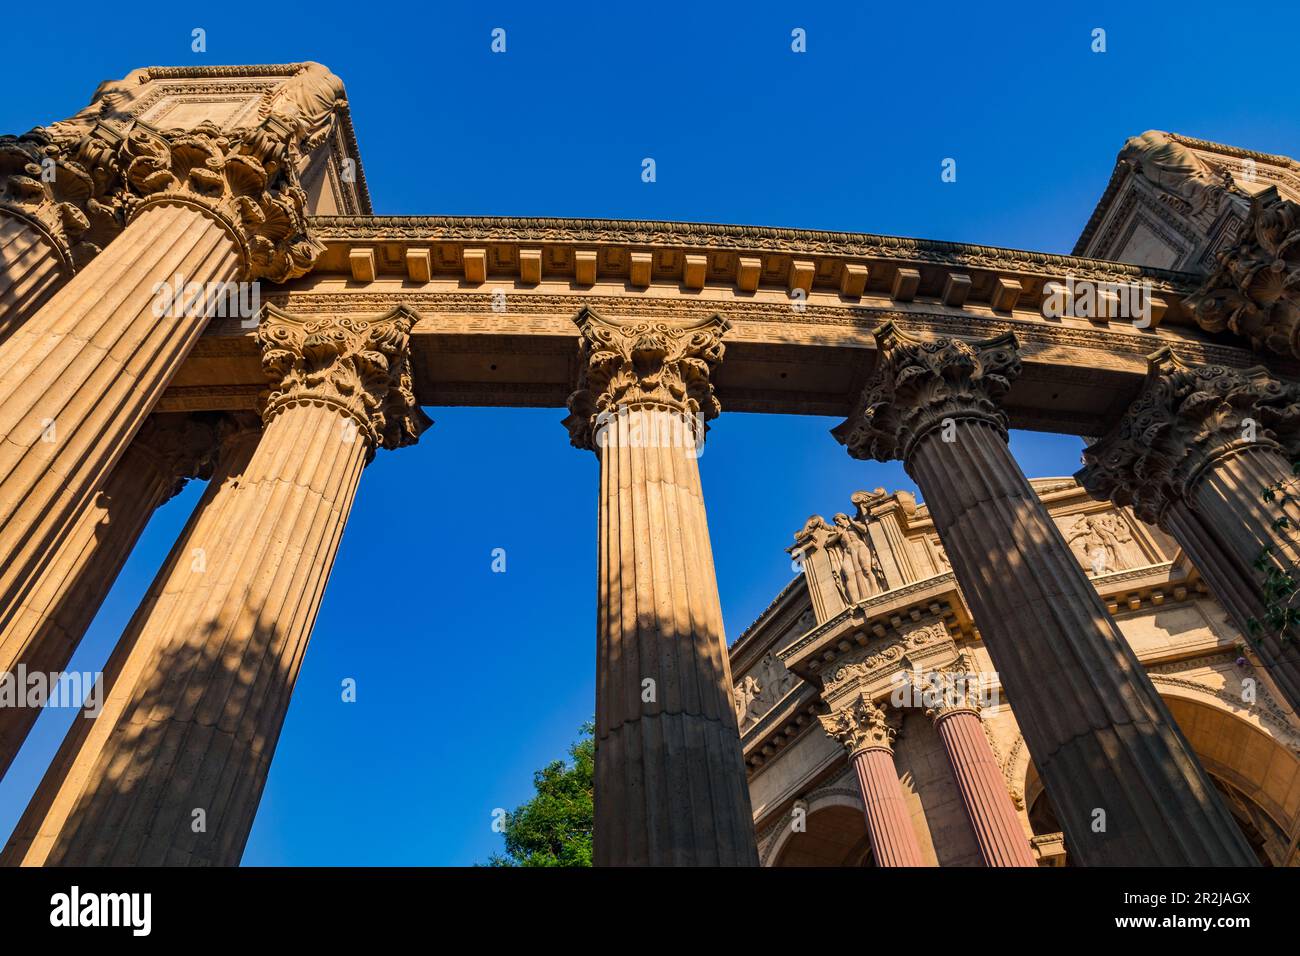 The great arch and pillars of the Palace of Fine Arts in the Marina District in San Francisco, Bay Area, California, United States Stock Photo